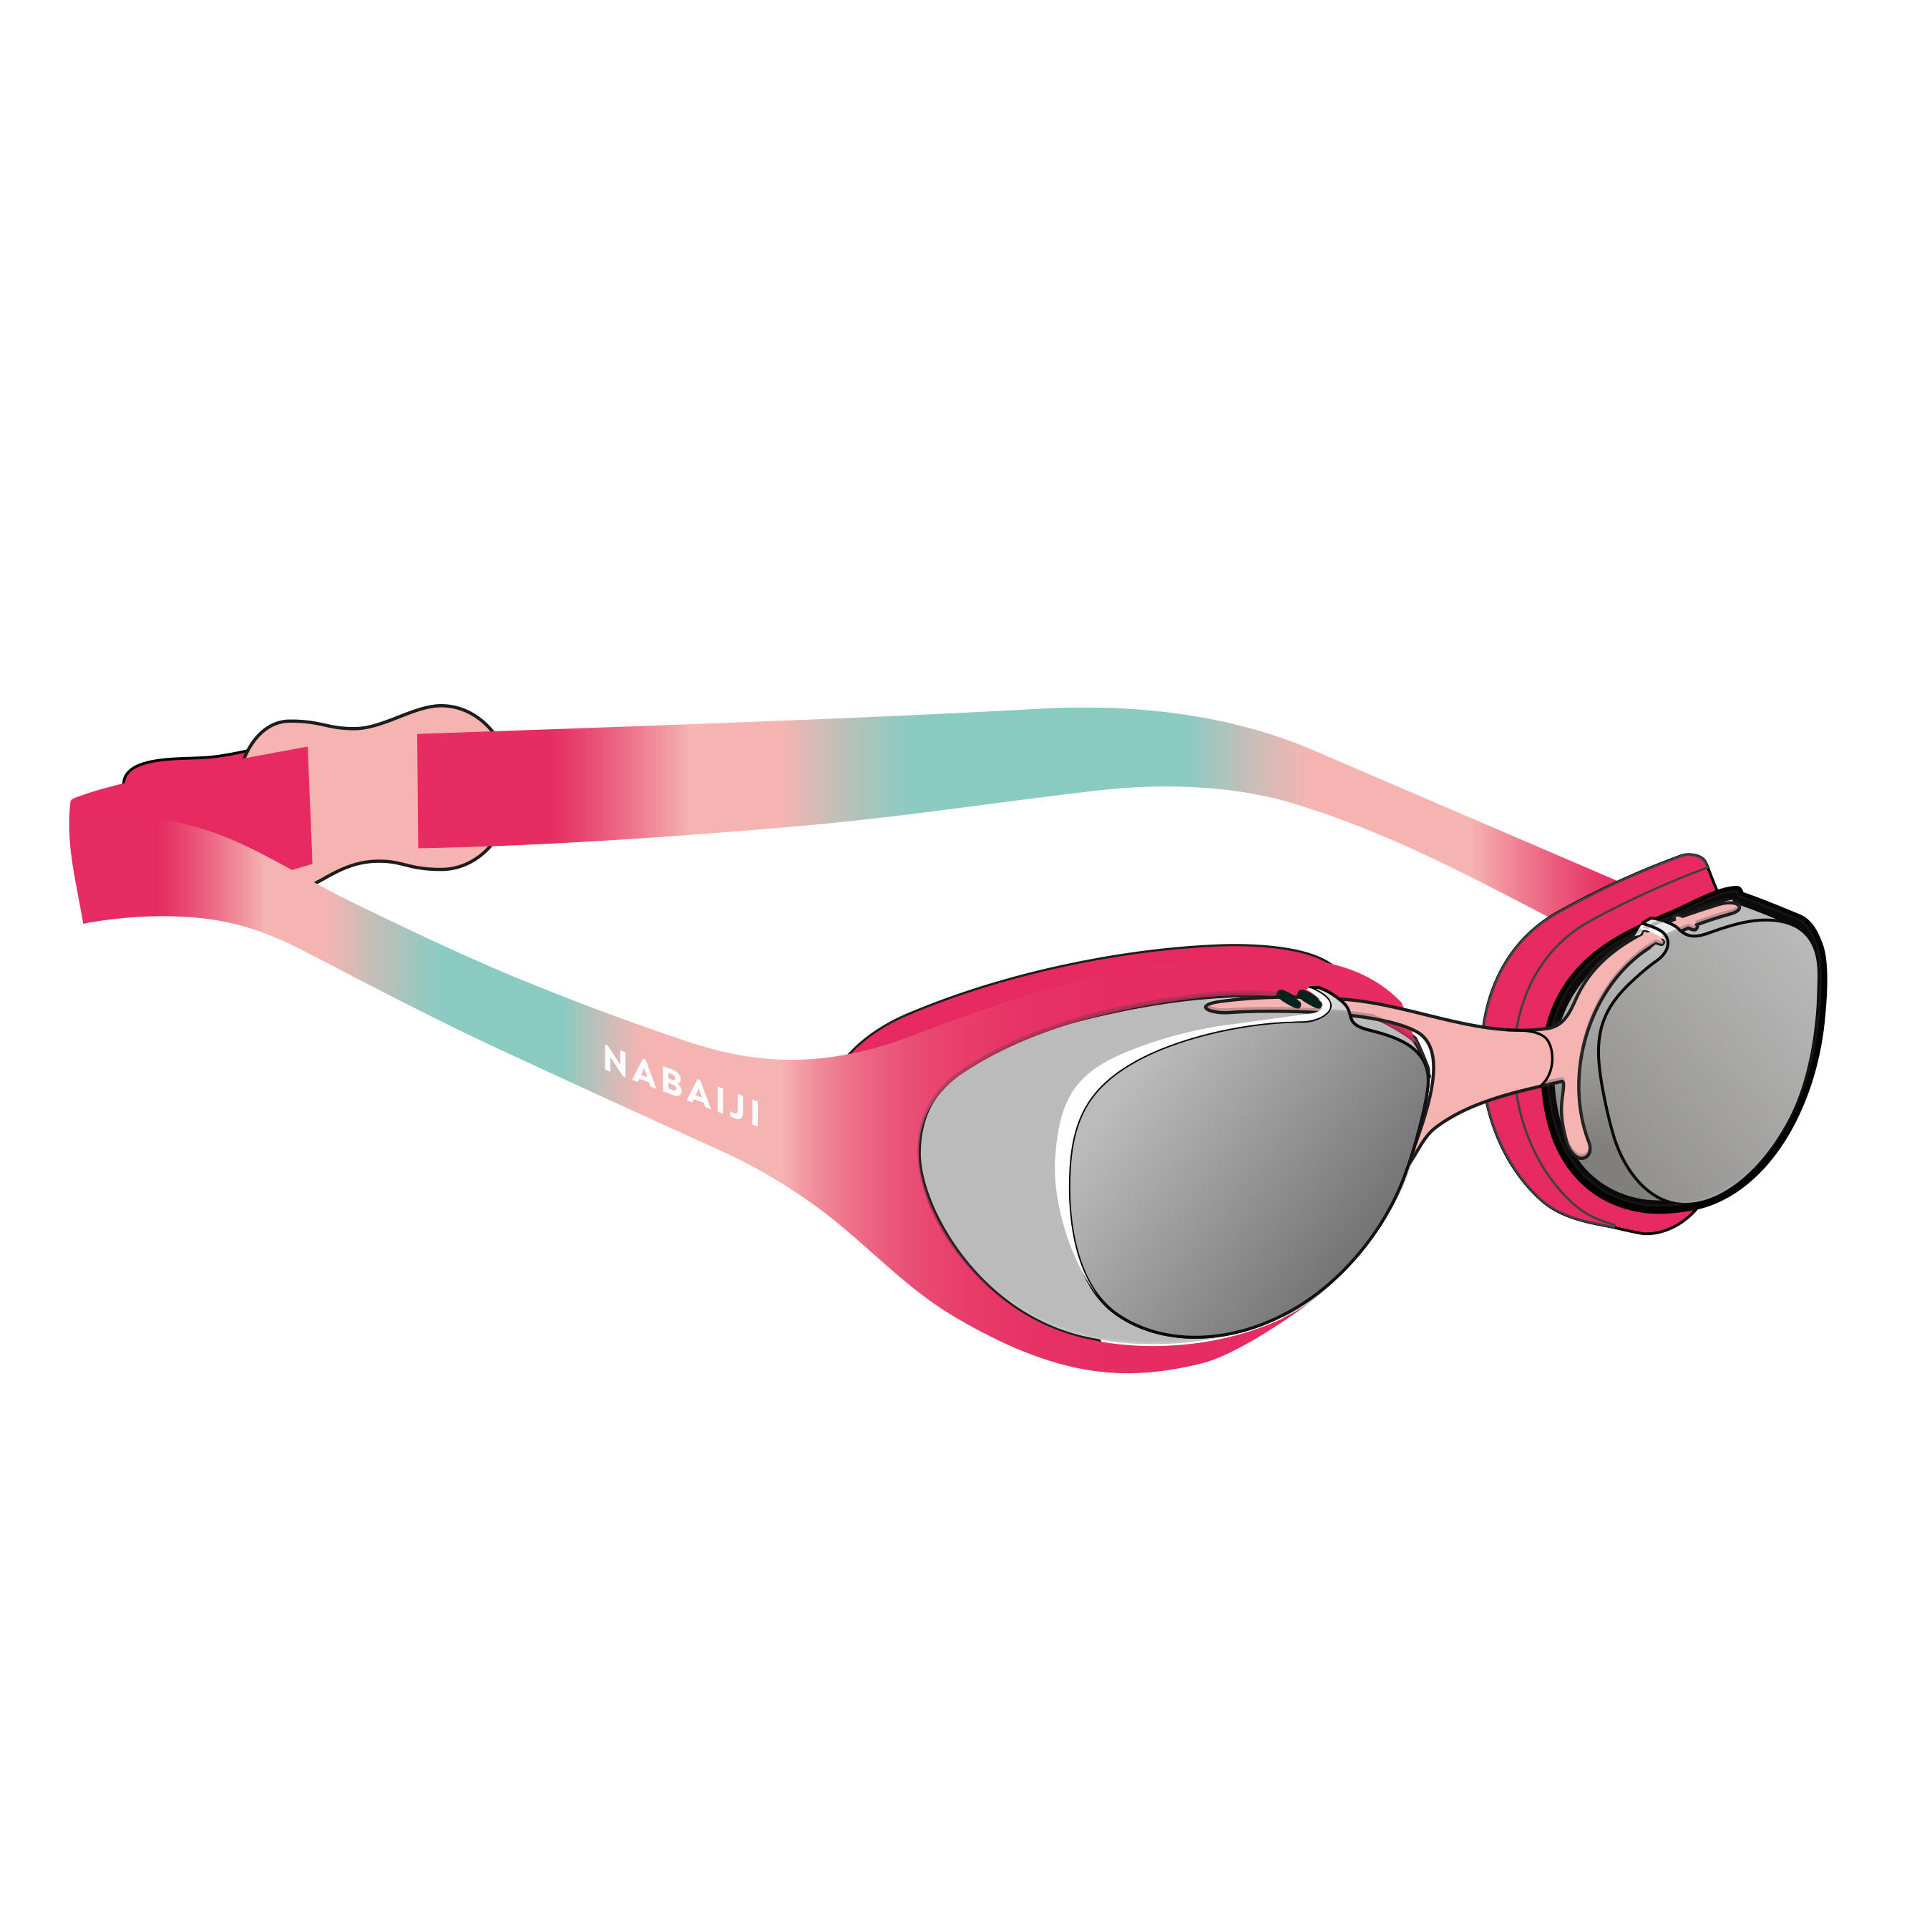 Swimming goggles XBASE - Clear lenses - Kids' size - Pink blue 6/6